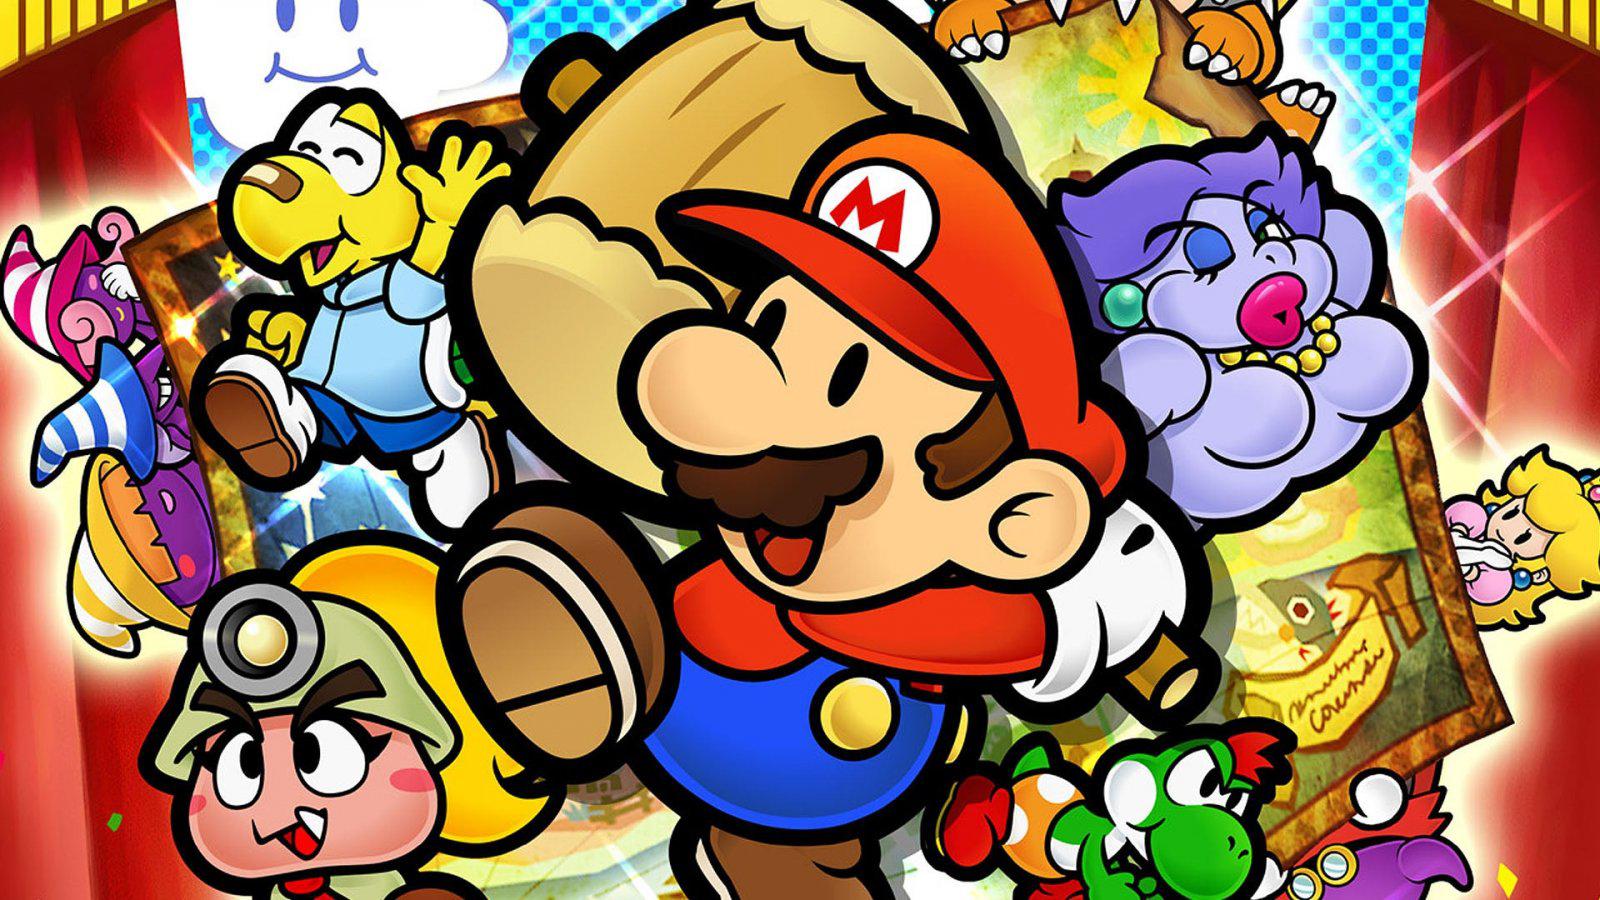 Fabriano Recognizes Paper Mario as a Timeless Master